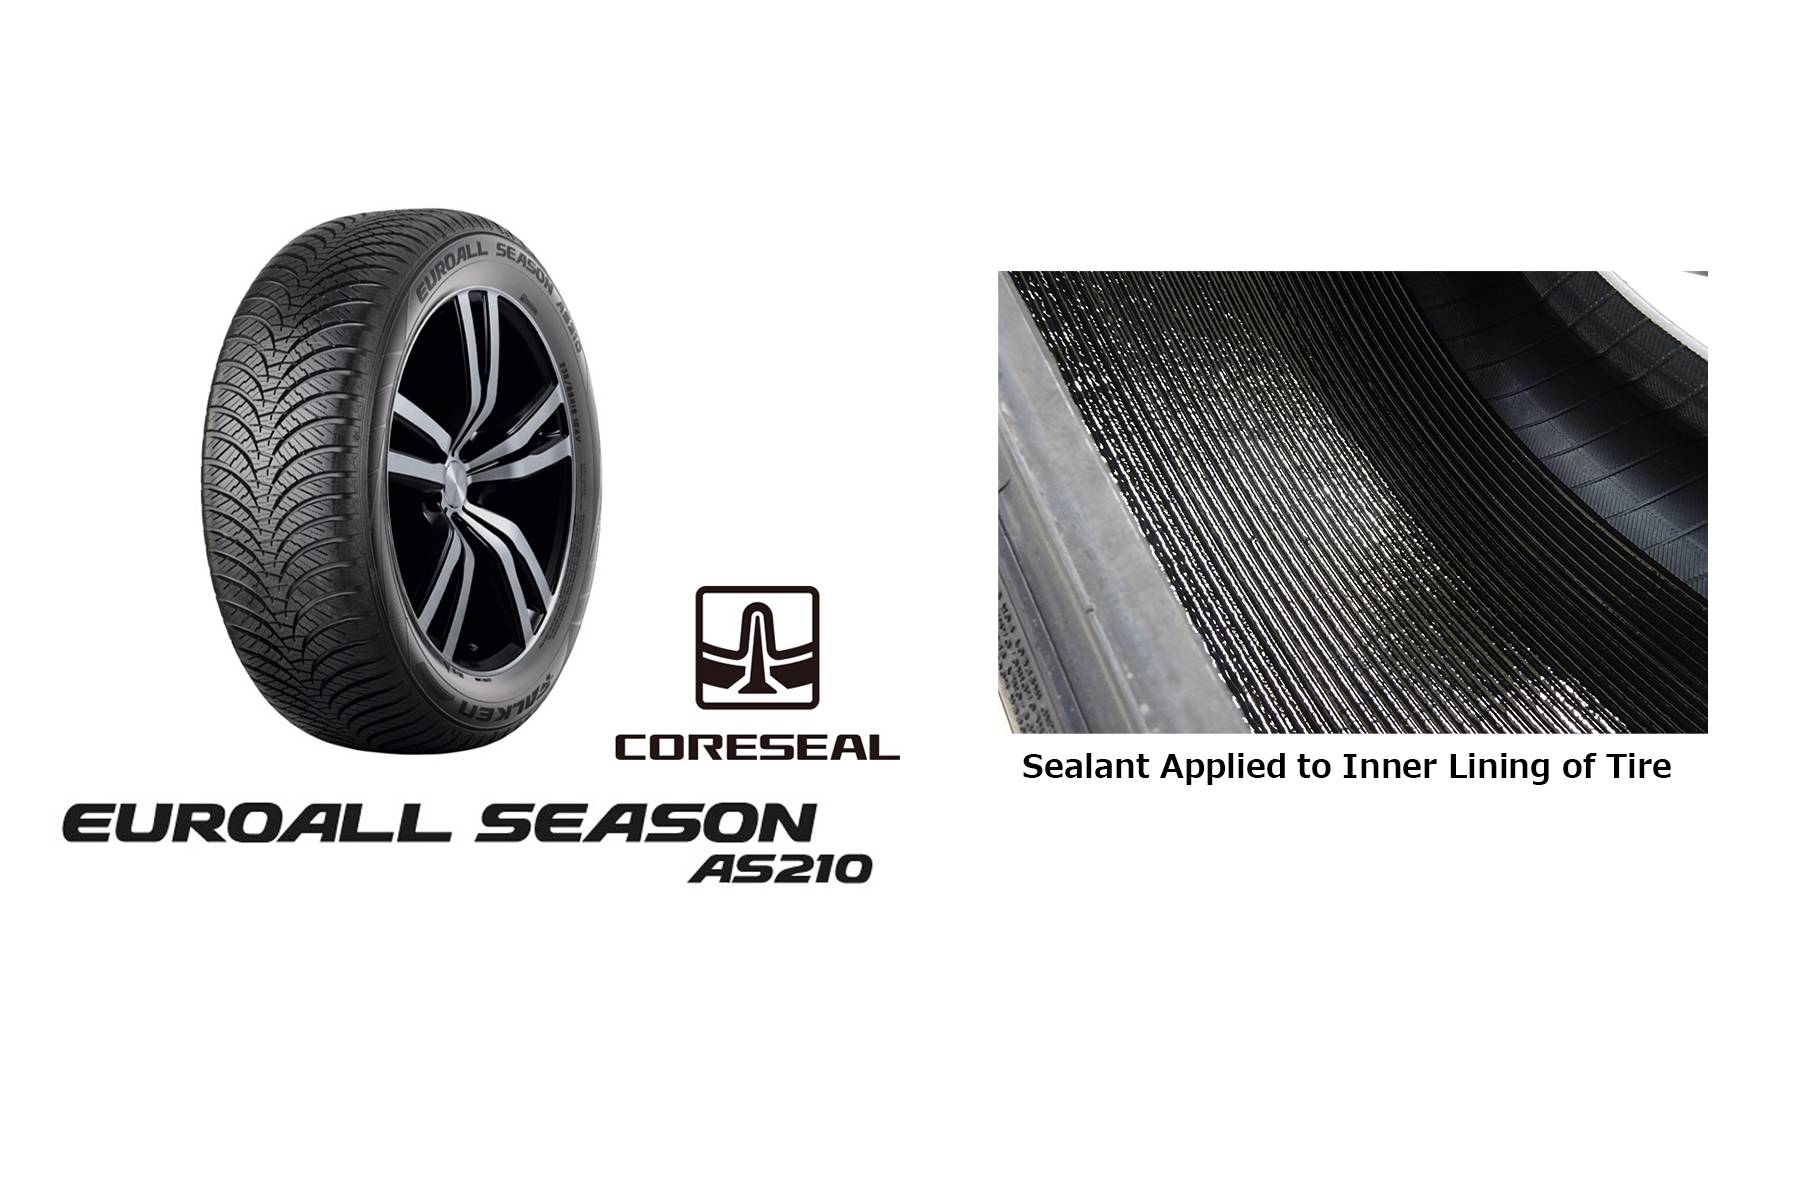 FALKEN EUROALL SEASON AS210 Released in Germany as First Tire to Feature  CORESEAL Technology for the Prevention of Air Leaks | FALKEN Global Website